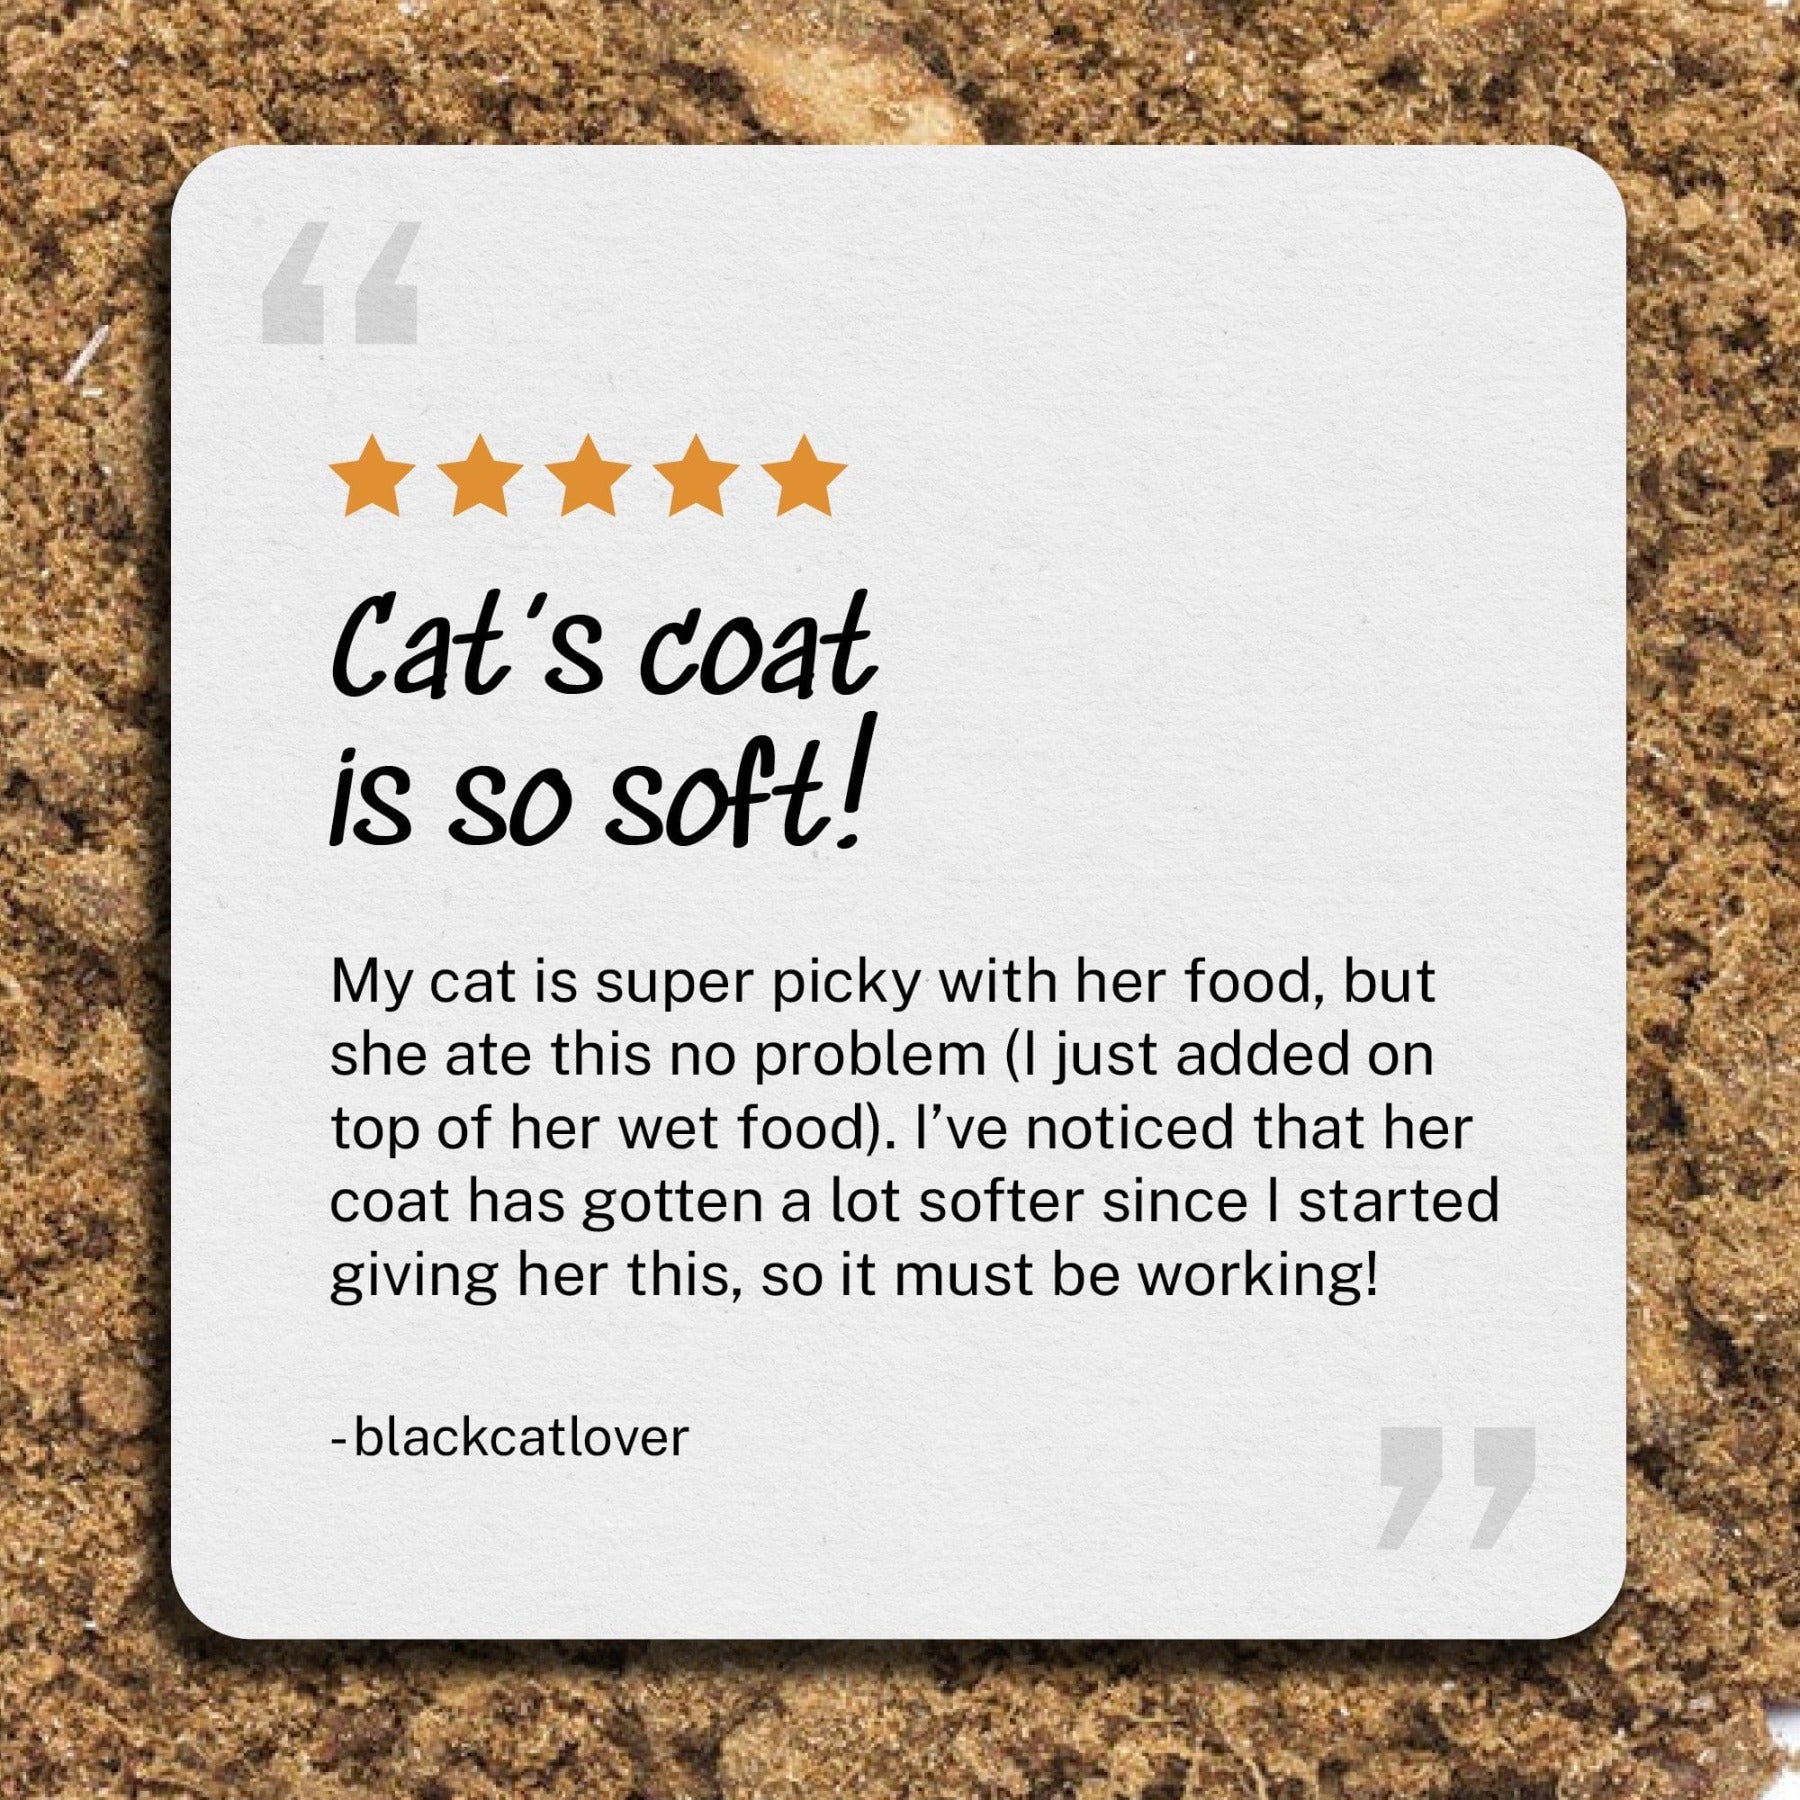 Review: Cat’s coat  is so soft! - My cat is super picky with her food, but she ate this no problem (I just added on top of her wet food). I’ve noticed that her coat has gotten a lot softer since I started giving her this, so it must be working! -  blackcatlover